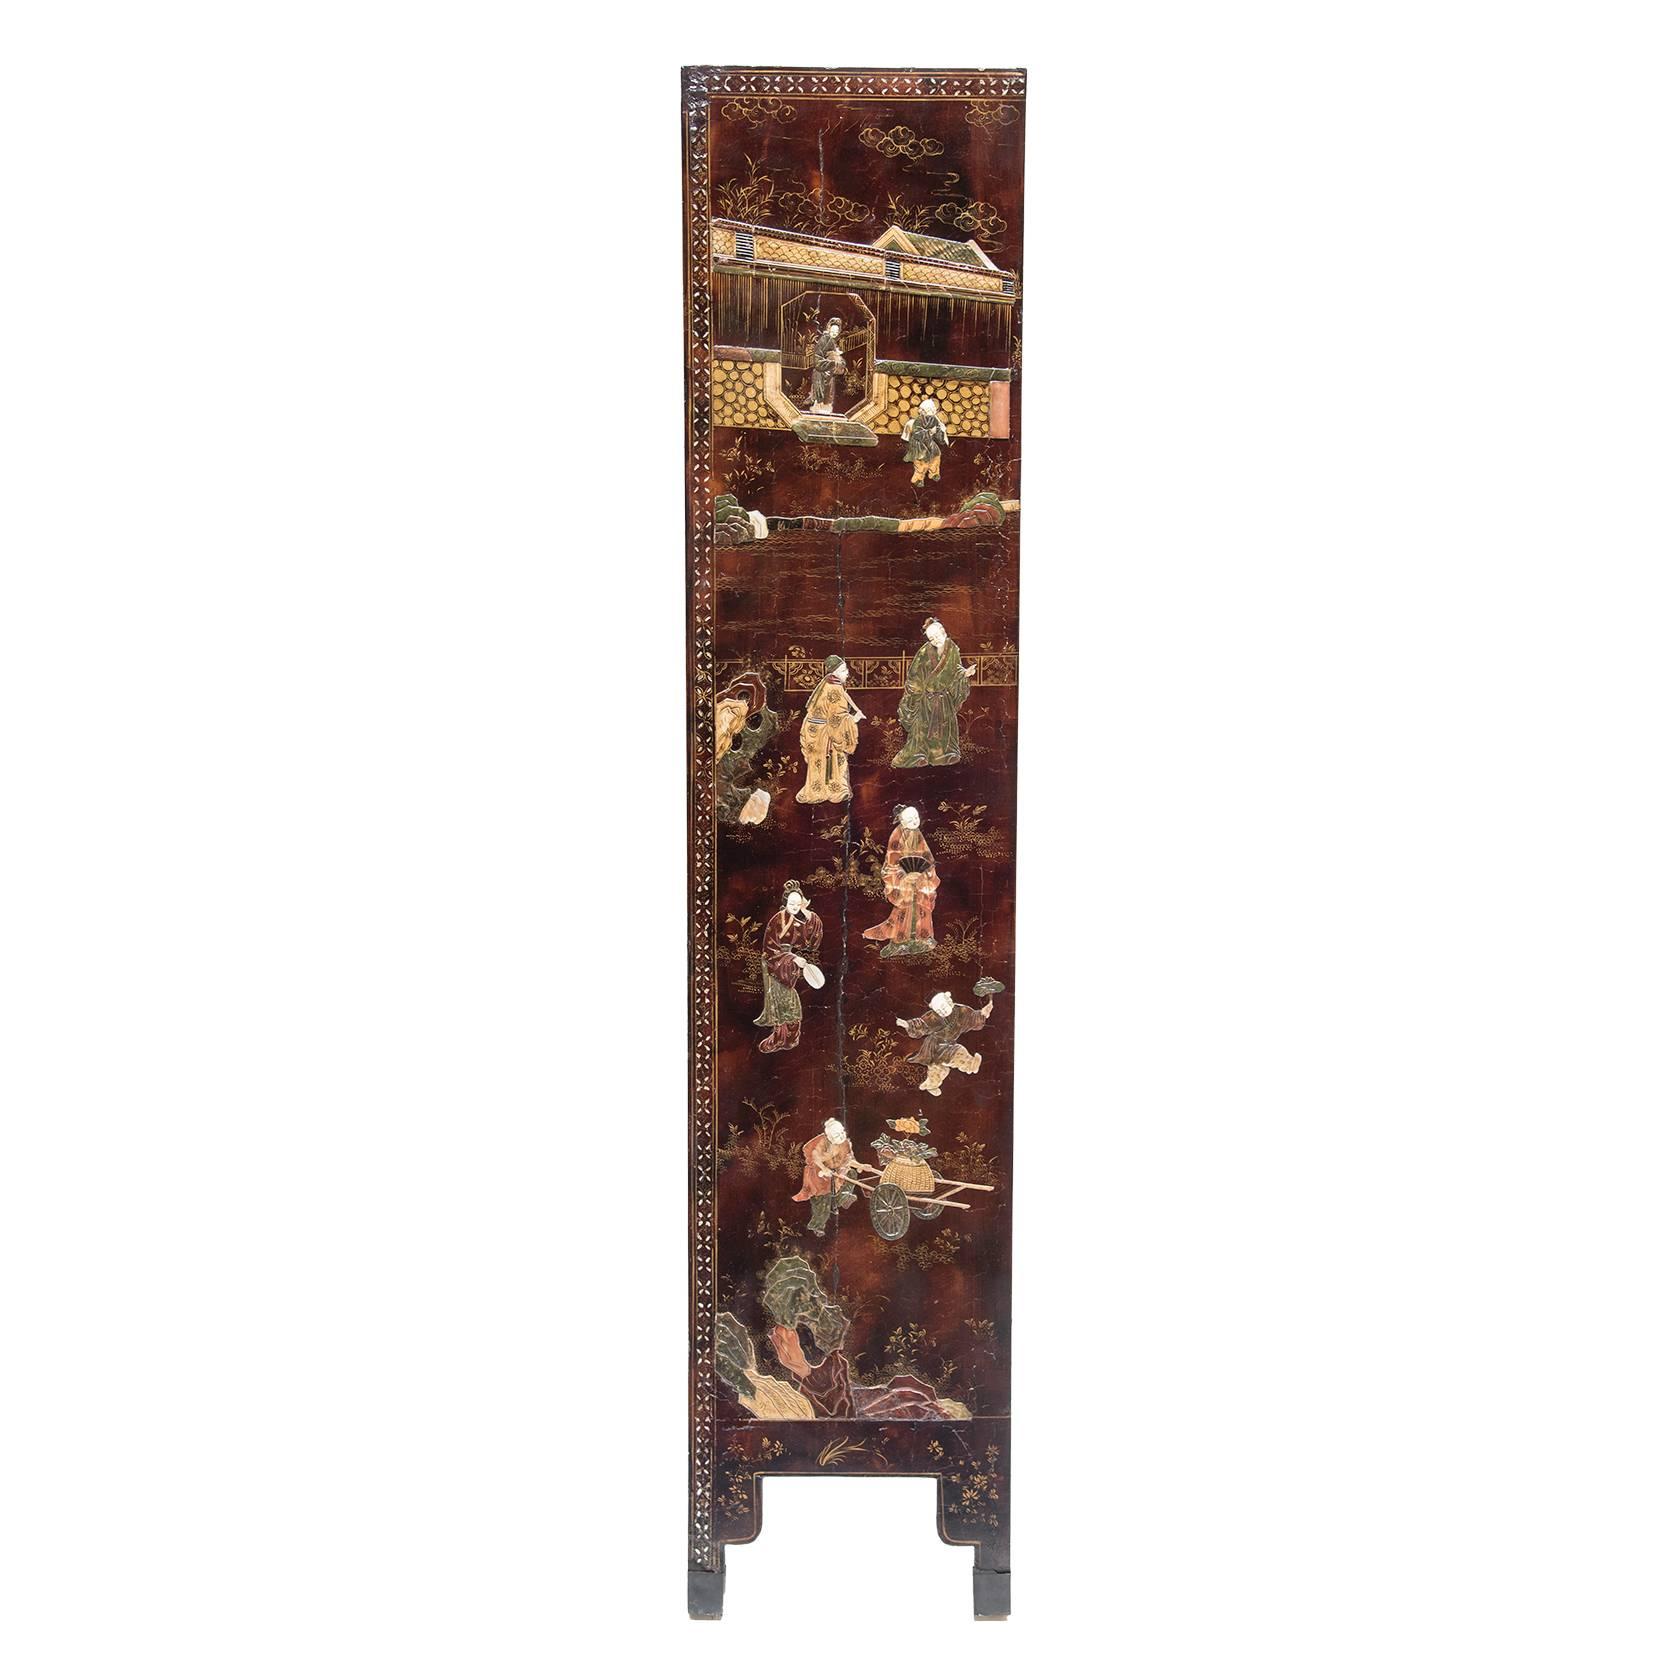 An 18th century six-panel screen exquisitely inlaid with soapstone, mother-of-pearl, jade, and bone with a continuous scene depicting robed scholars and attendants in a garden setting. A hard stone pavilion next to a waterway is central to the